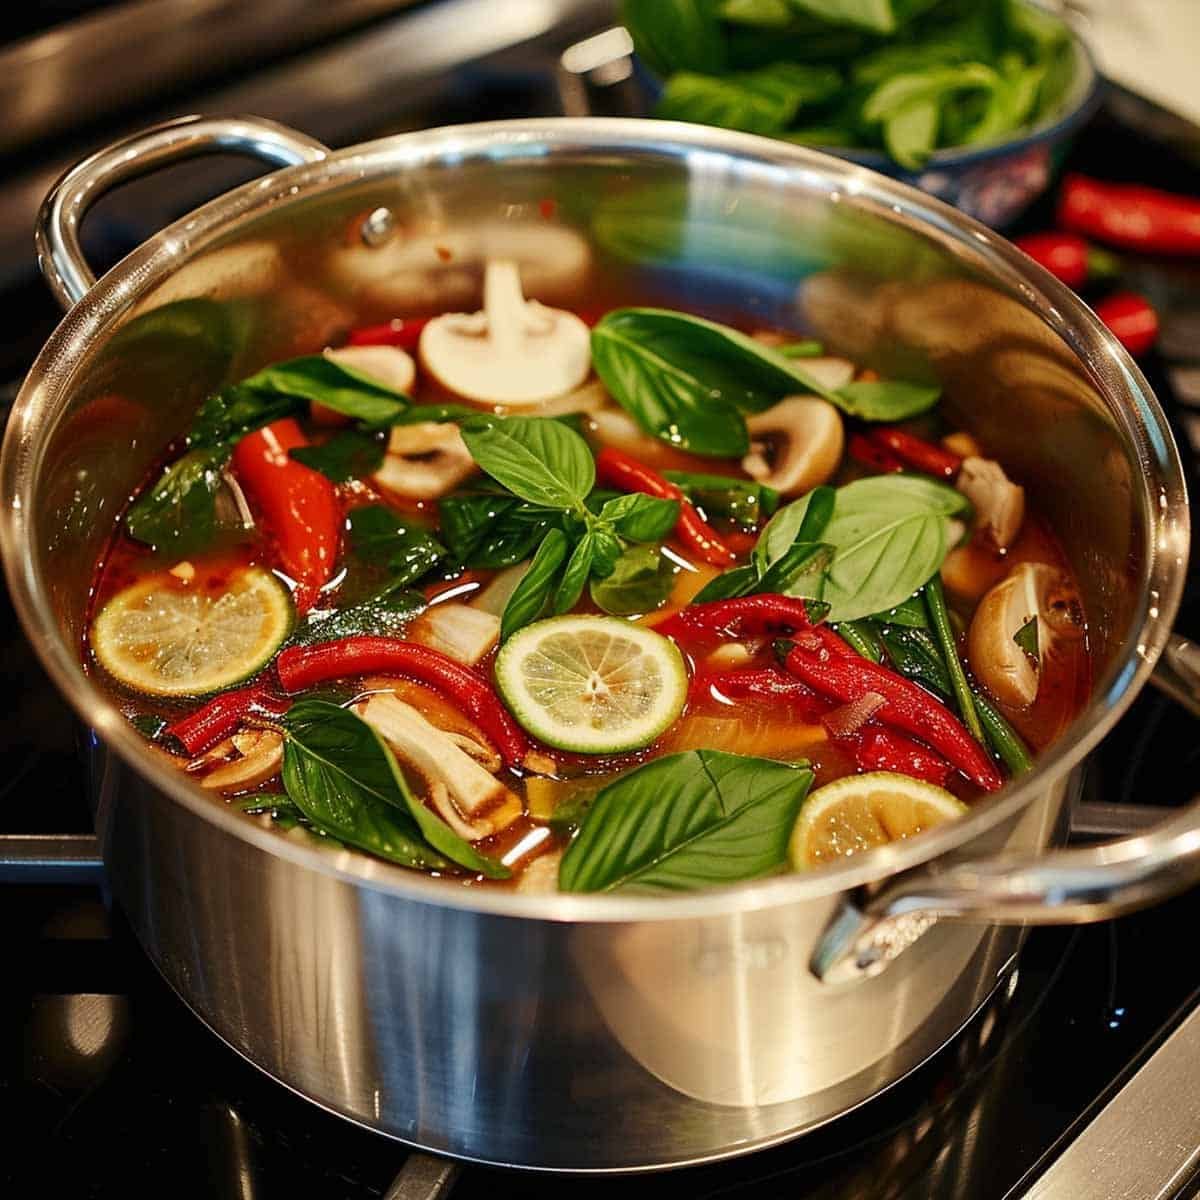 Adding lemongrass, lime leaves, ginger, and chilies to simmering broth in a cooking pot